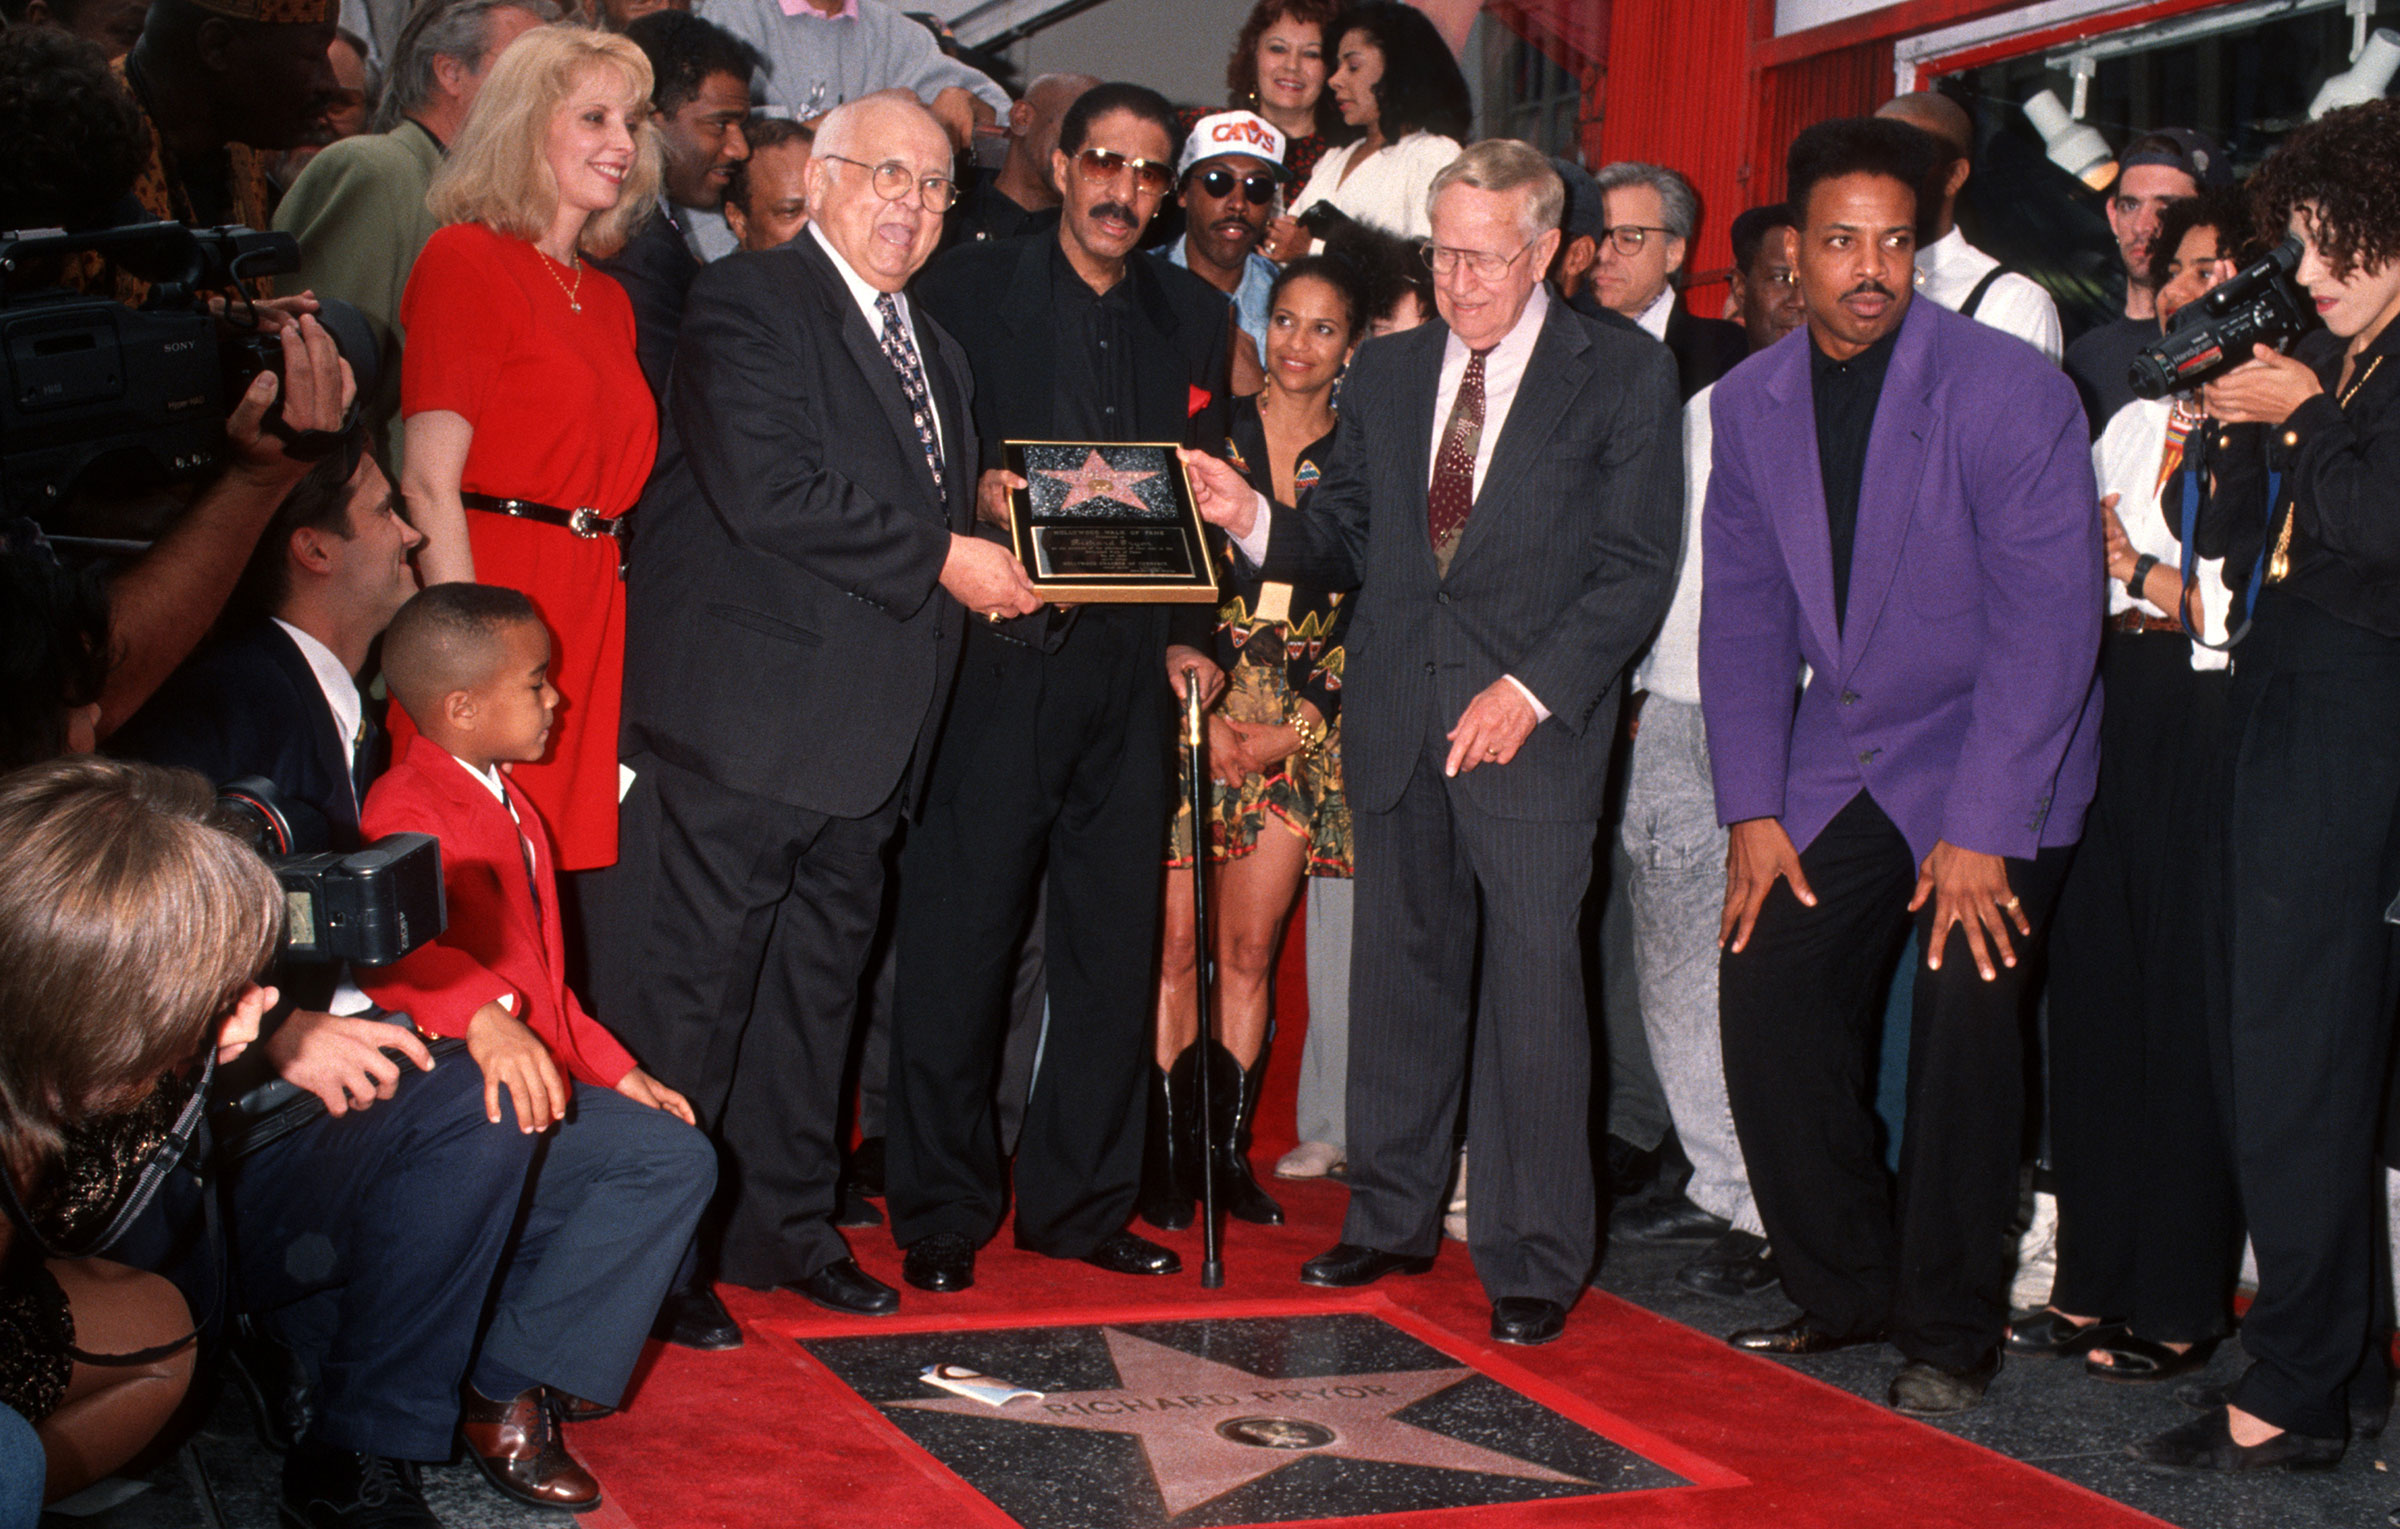 Richard Pryor and guests as Pryor Recieves a Hollywood Star on Walk of Fame at Hollywood Boulevard in Calif., ca. 1993. (Ron Galella—Ron Galella Collection/Getty Images)